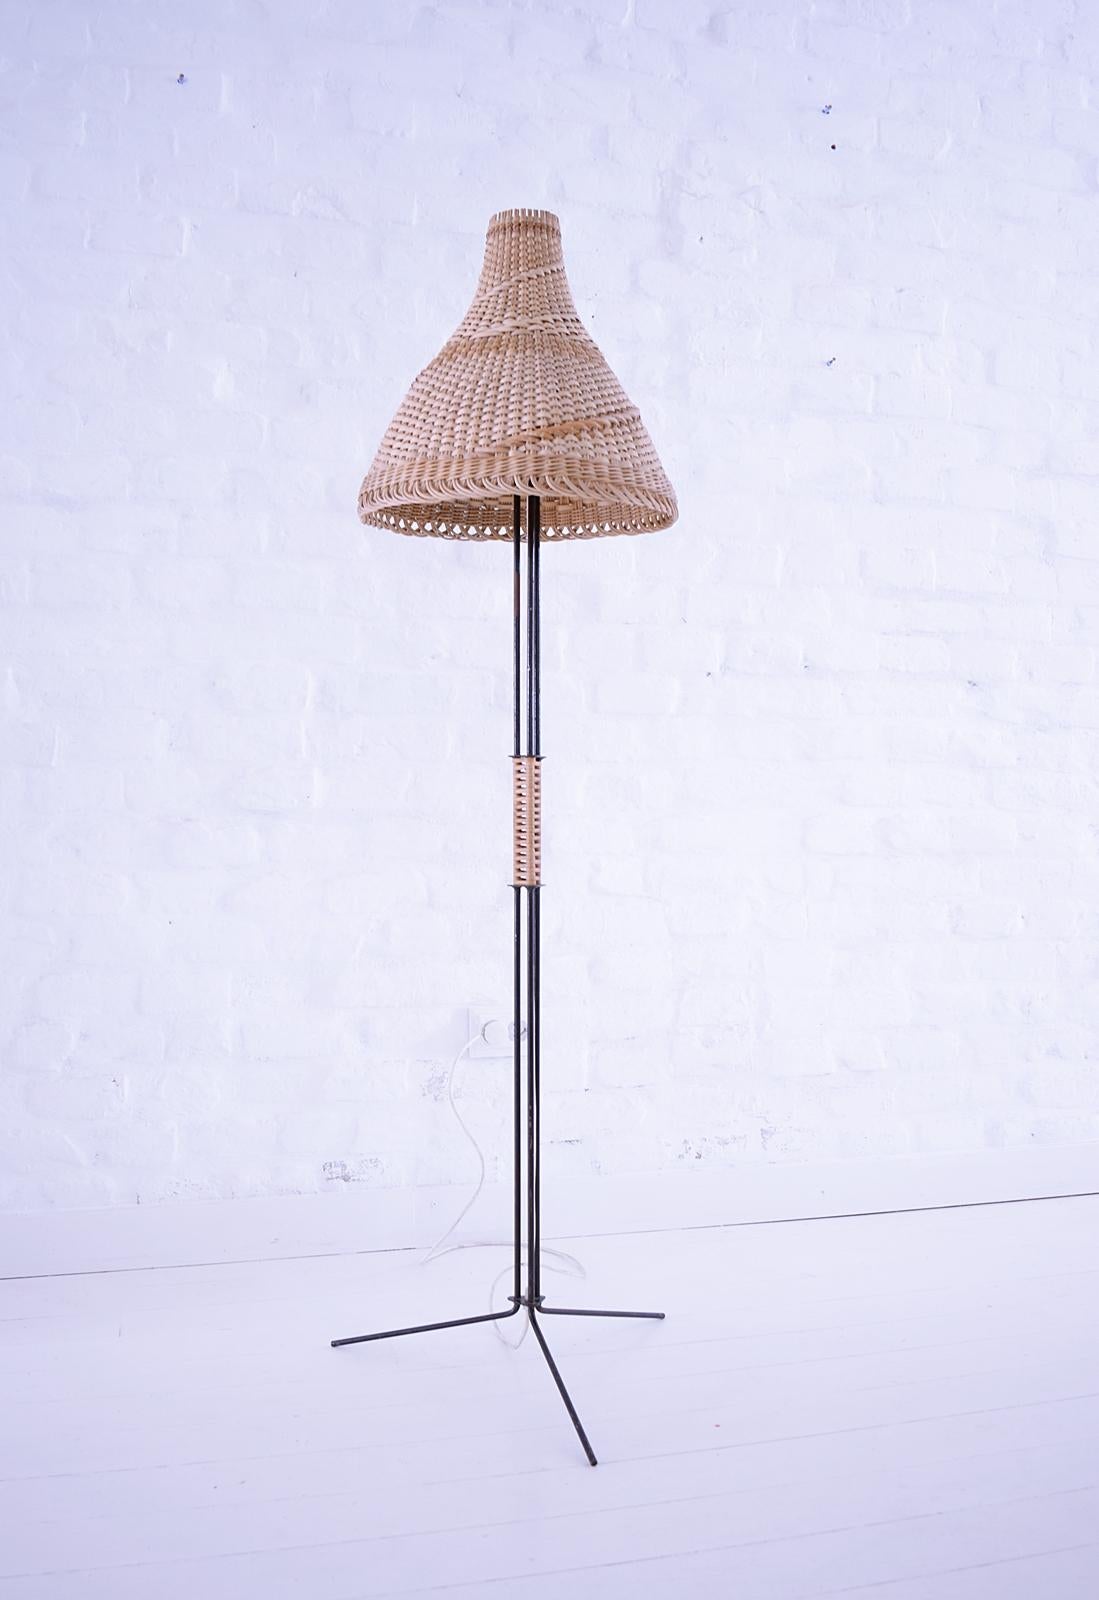 Beautiful Mid-Century Modern tripod floor lamp with basket shade great minimalistic 1950s design. In good vintage condition. The metal frame is painted black and has a wicker wrapped handle. Fully functional with one E27 socket. Works with 220V and